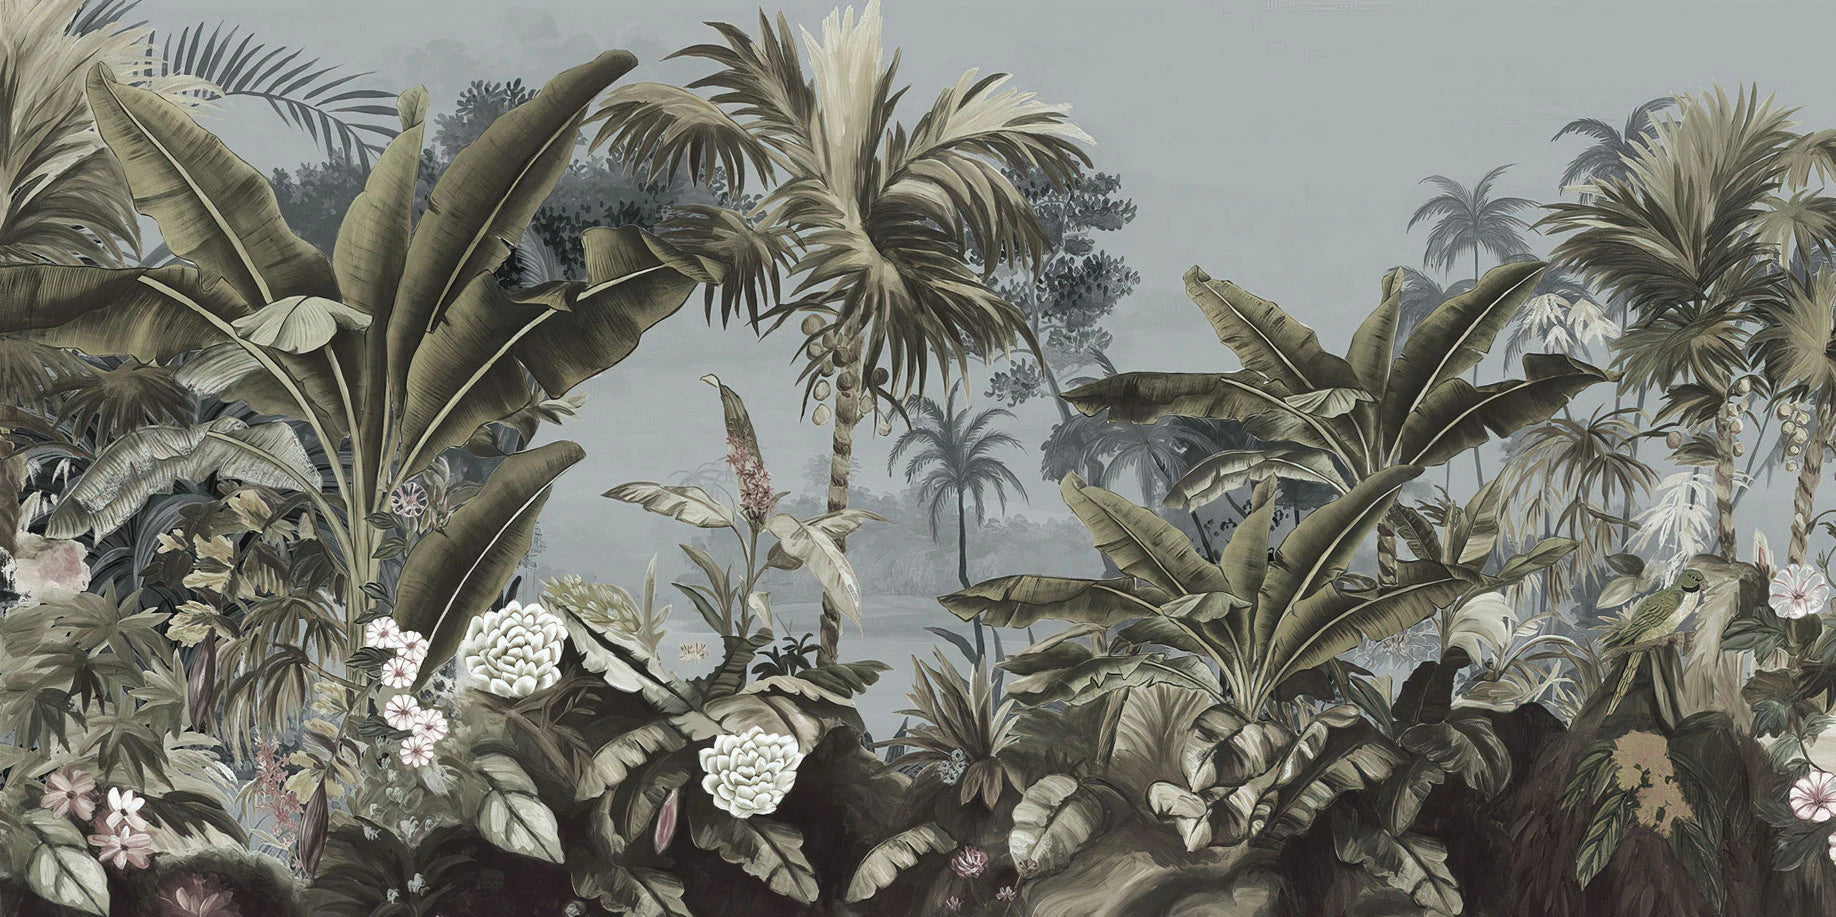 Wall Mural with Palm Trees in a Tropical Setting